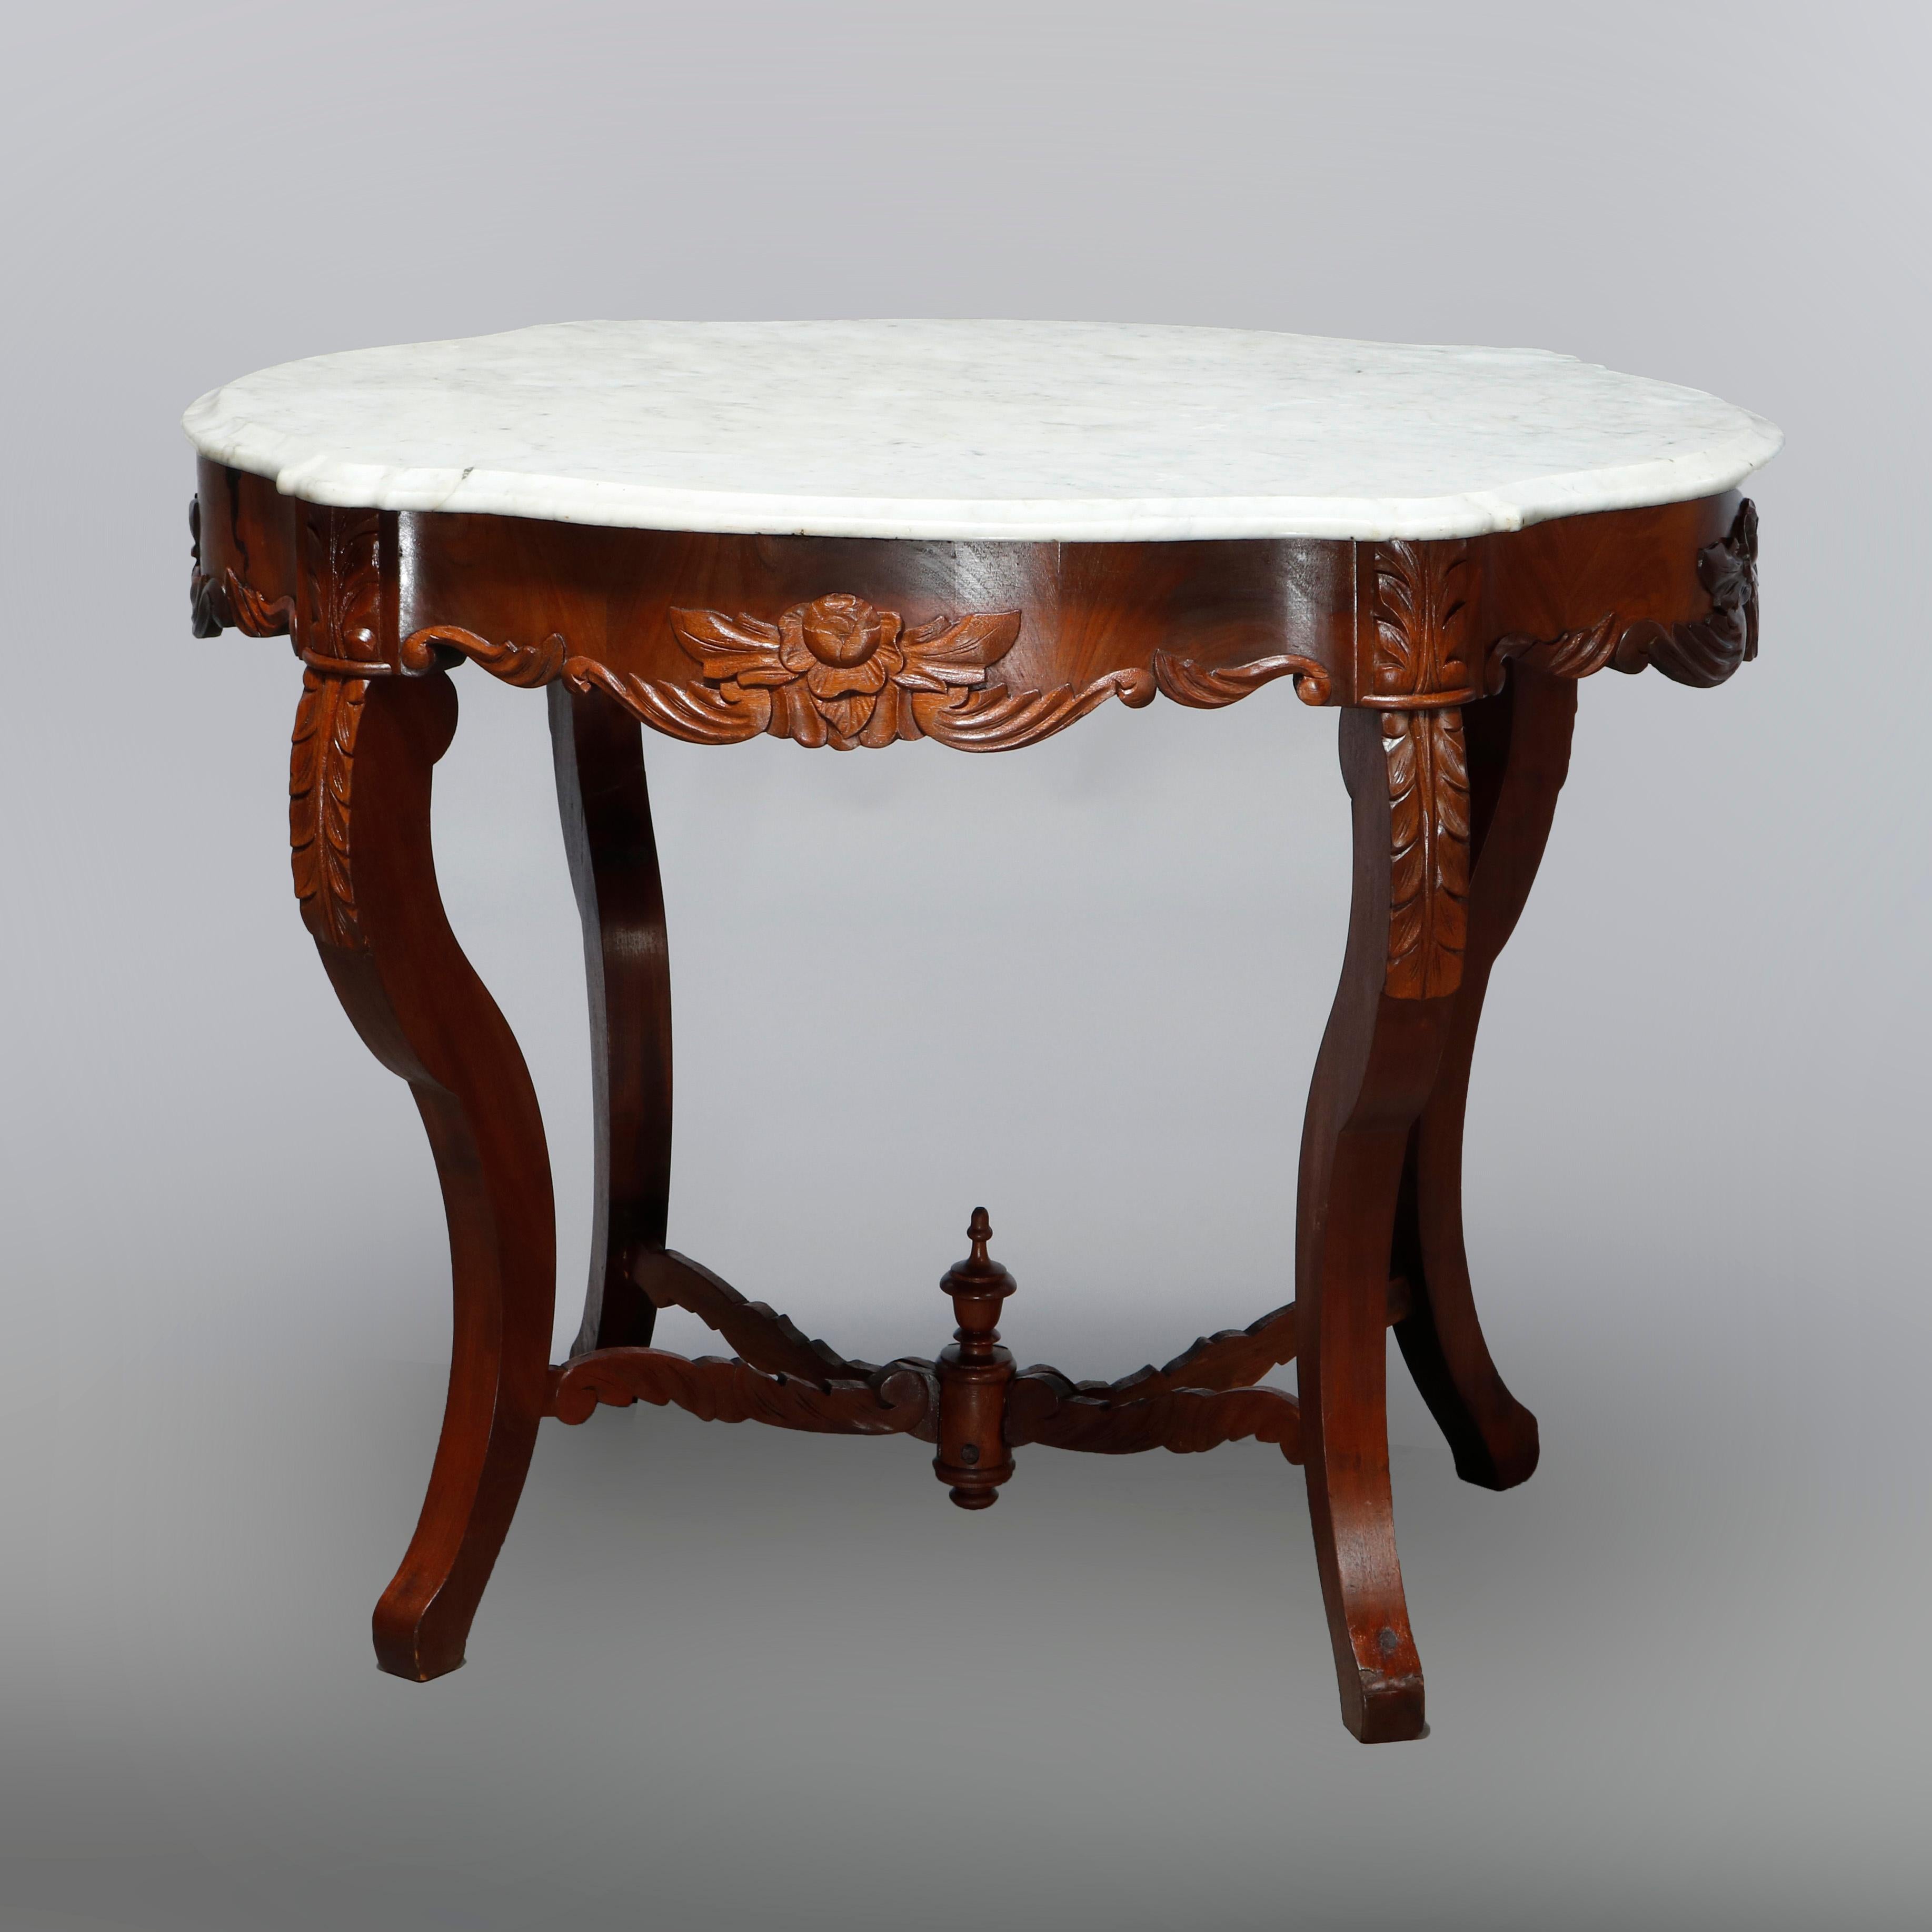 Antique Victorian Turtle Top Marble Top Mahogany & Walnut Lamp Table, Circa 1860 For Sale 5